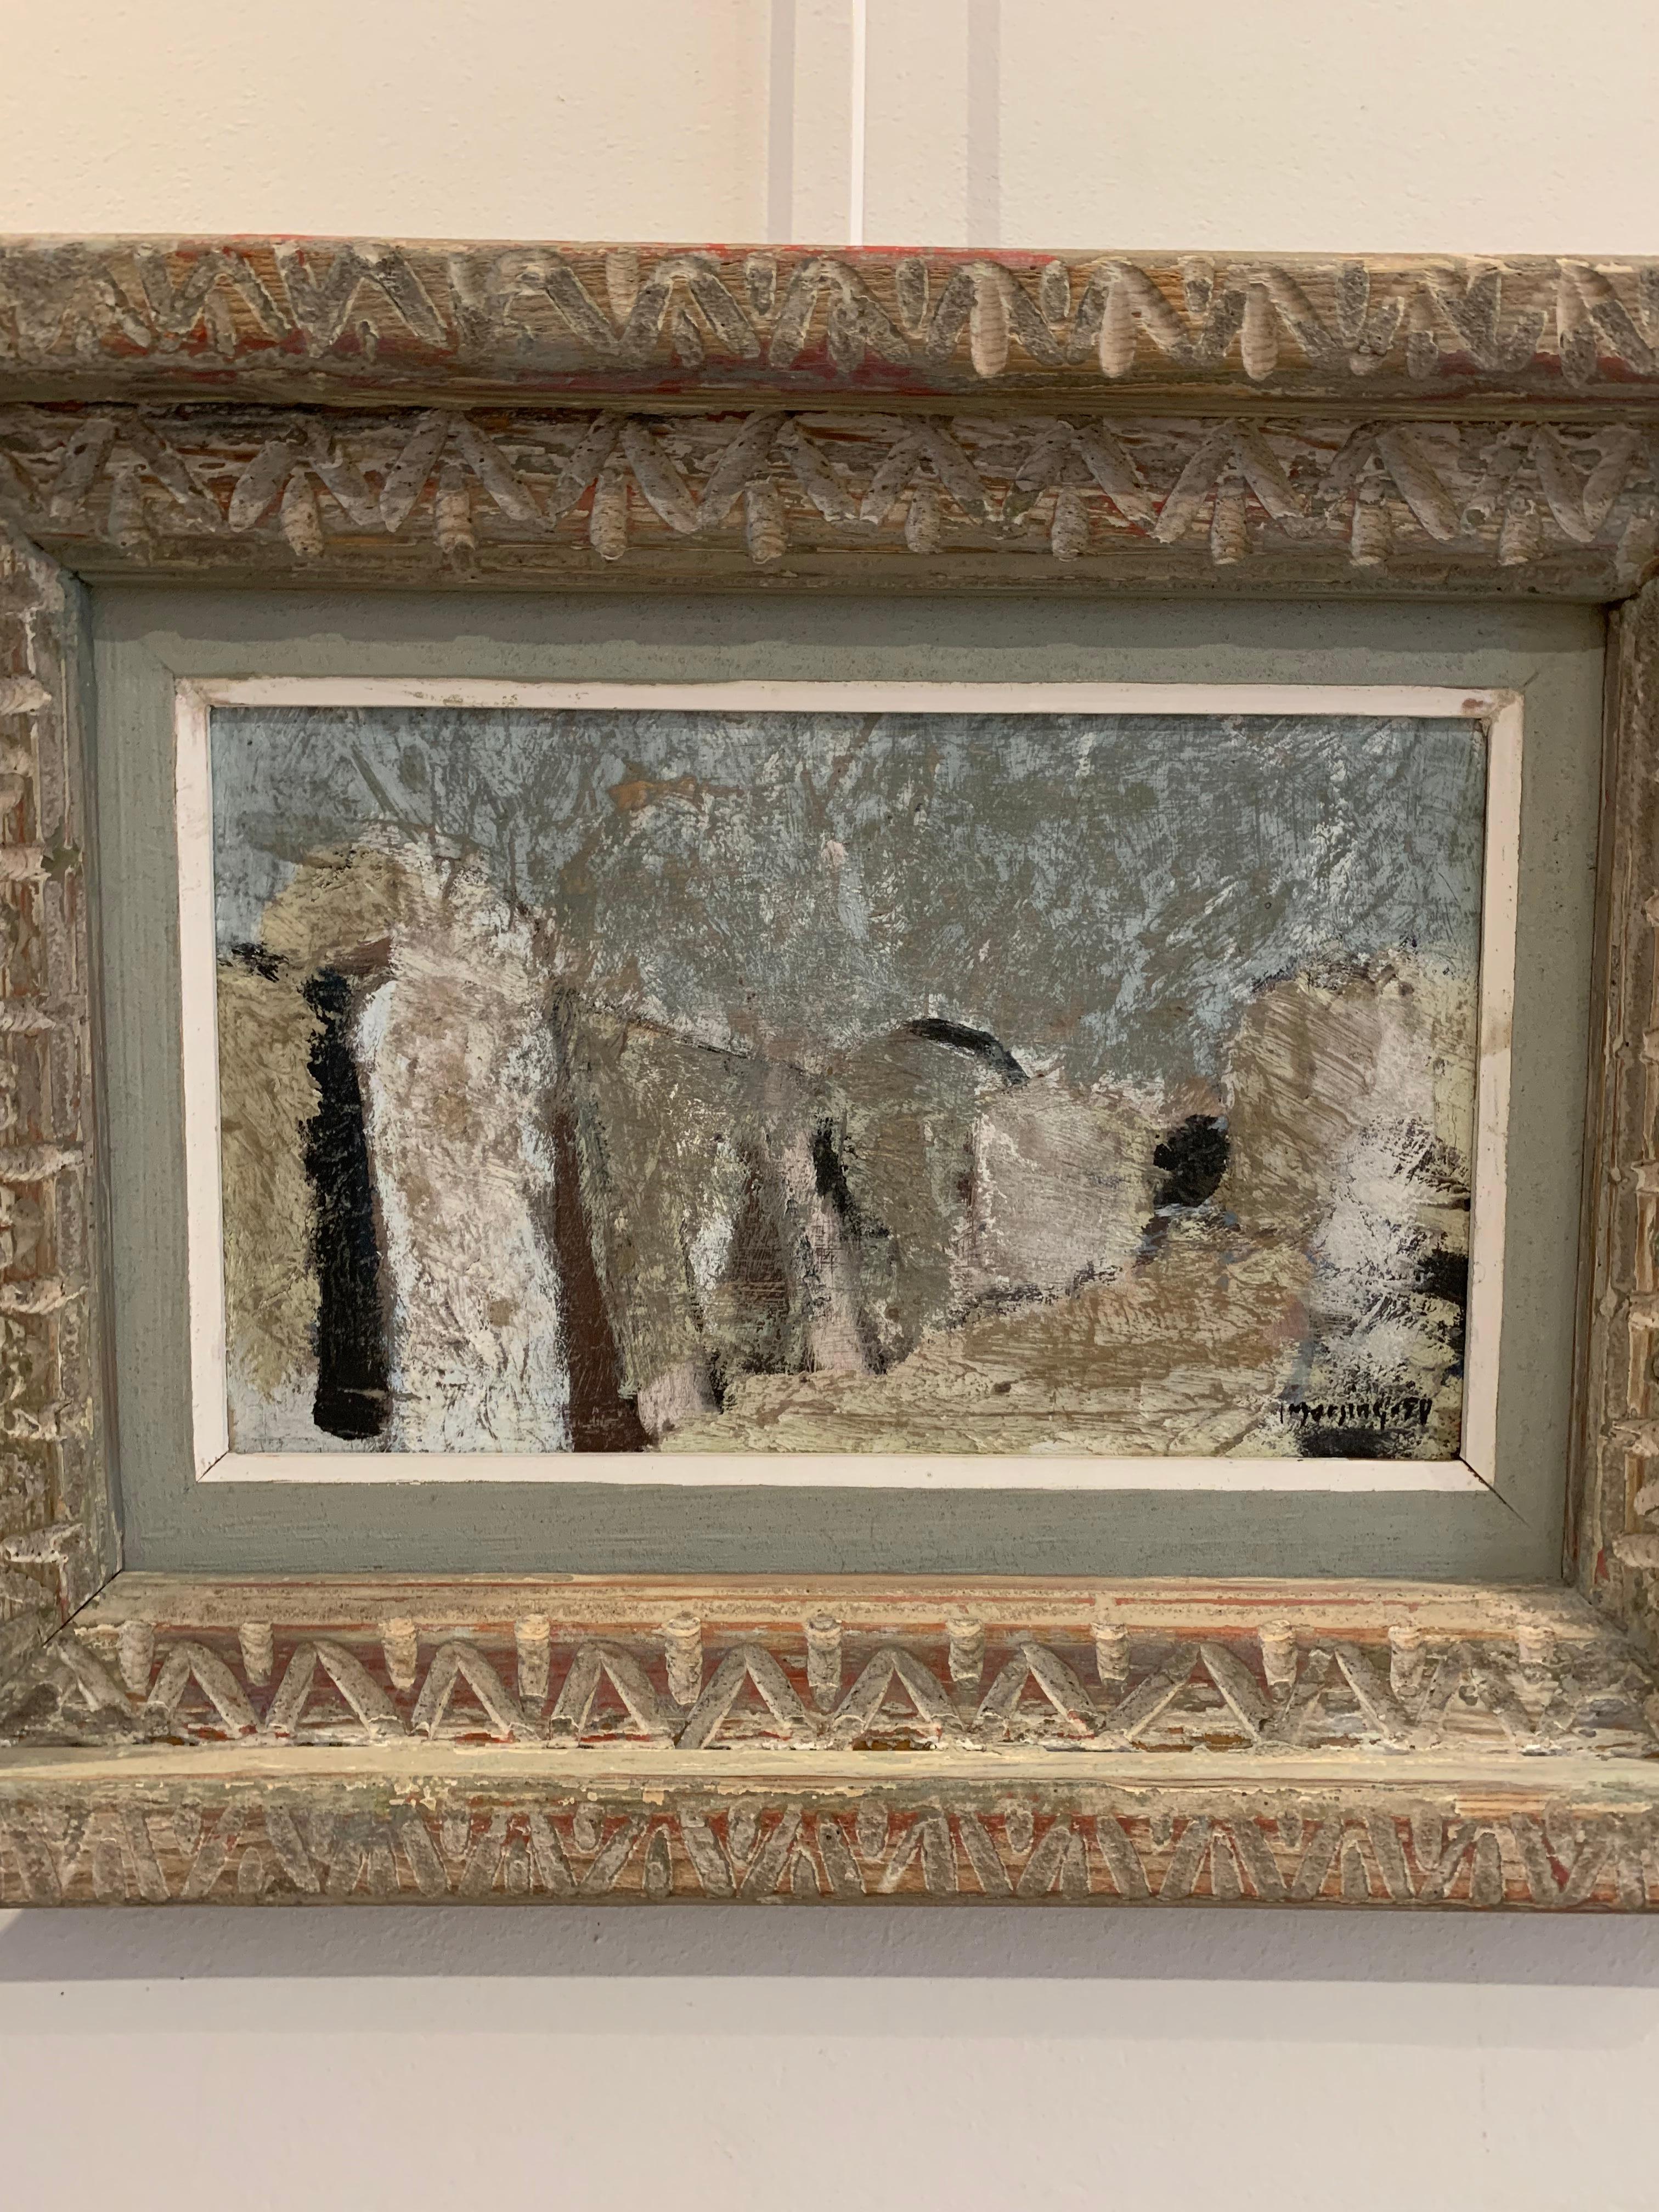 Mid 20th century framed Swedish oil painting on board by one of our favourite artists Ivar Morsing.
This abstract rectangular painting in different shades of pale grey is framed in a deep stepped and carved frame. A very attractive piece of work